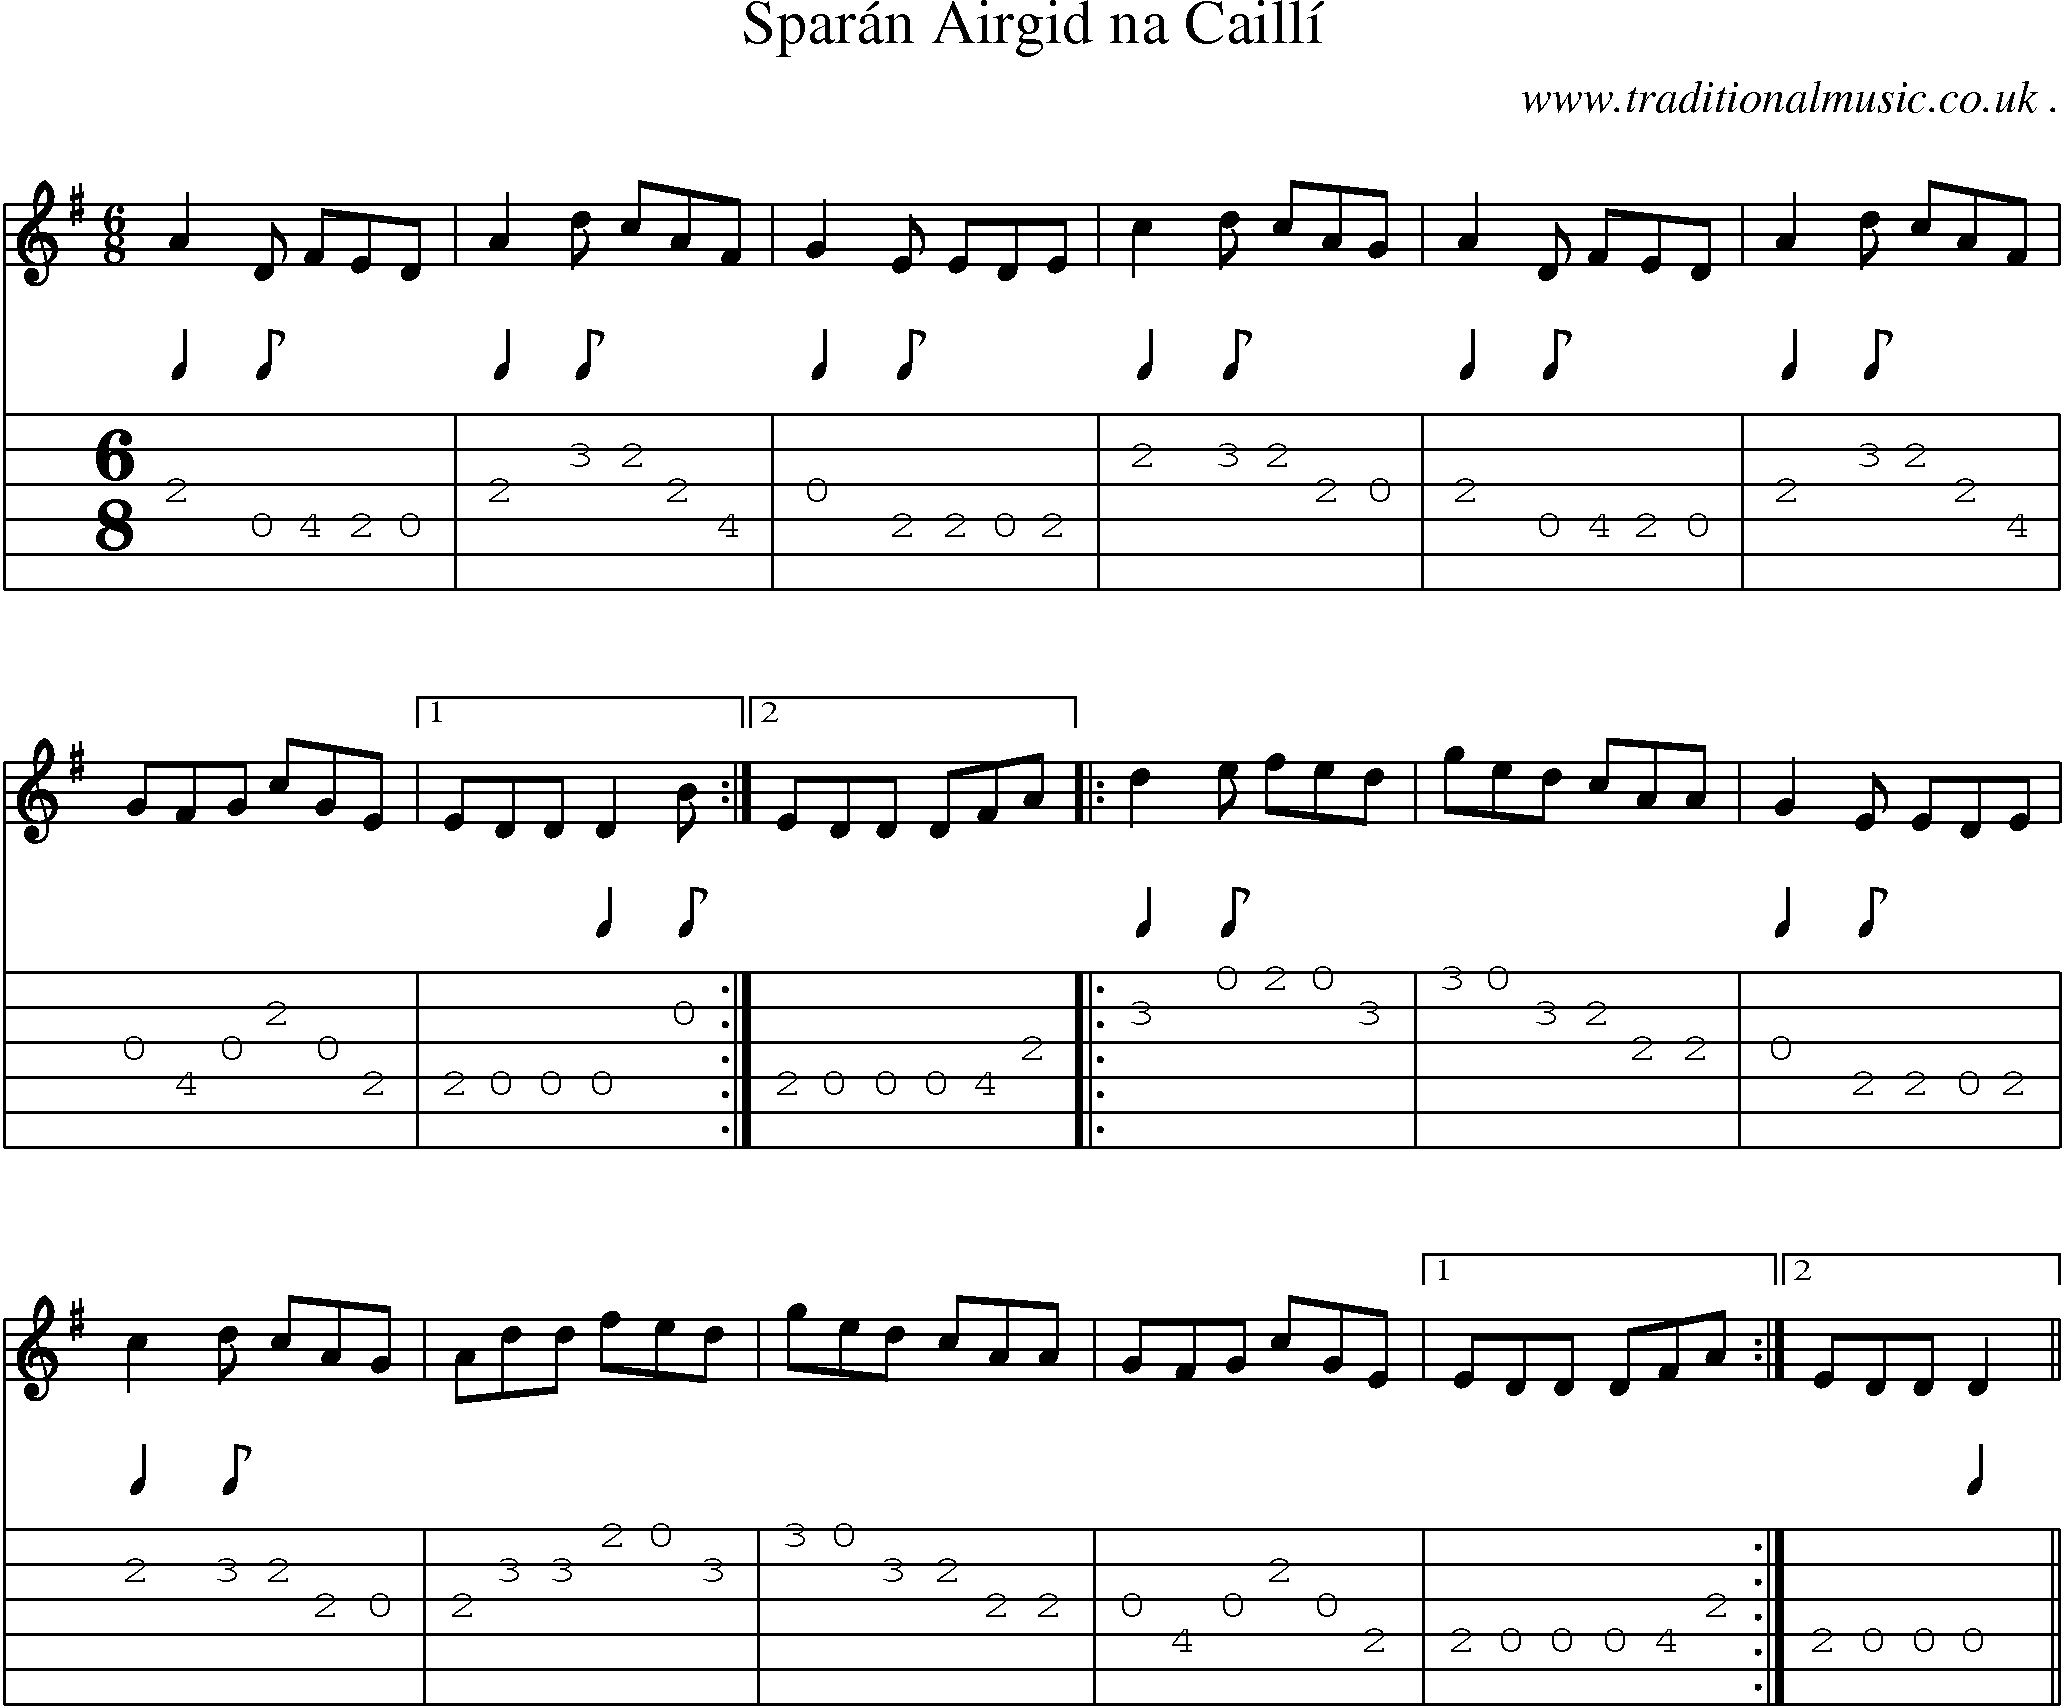 Sheet-Music and Guitar Tabs for Sparan Airgid Na Cailli